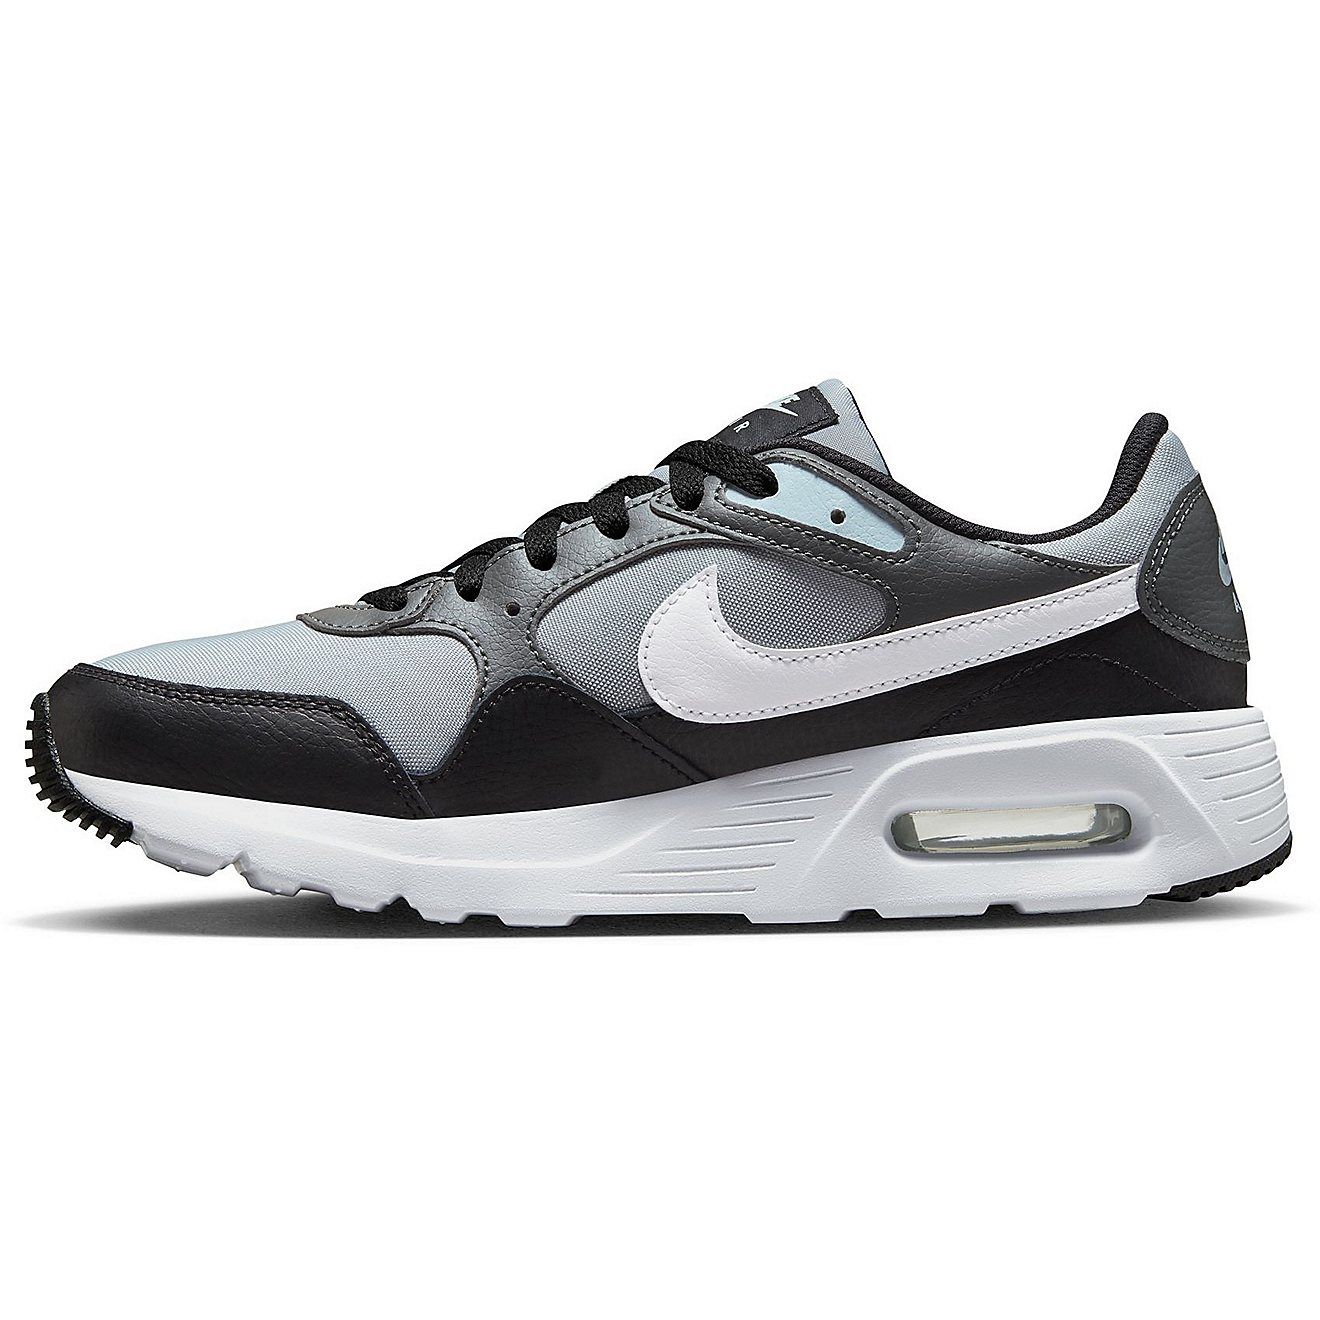 Nike Men’s Air Max SC Shoes | Free Shipping at Academy | Academy Sports + Outdoors